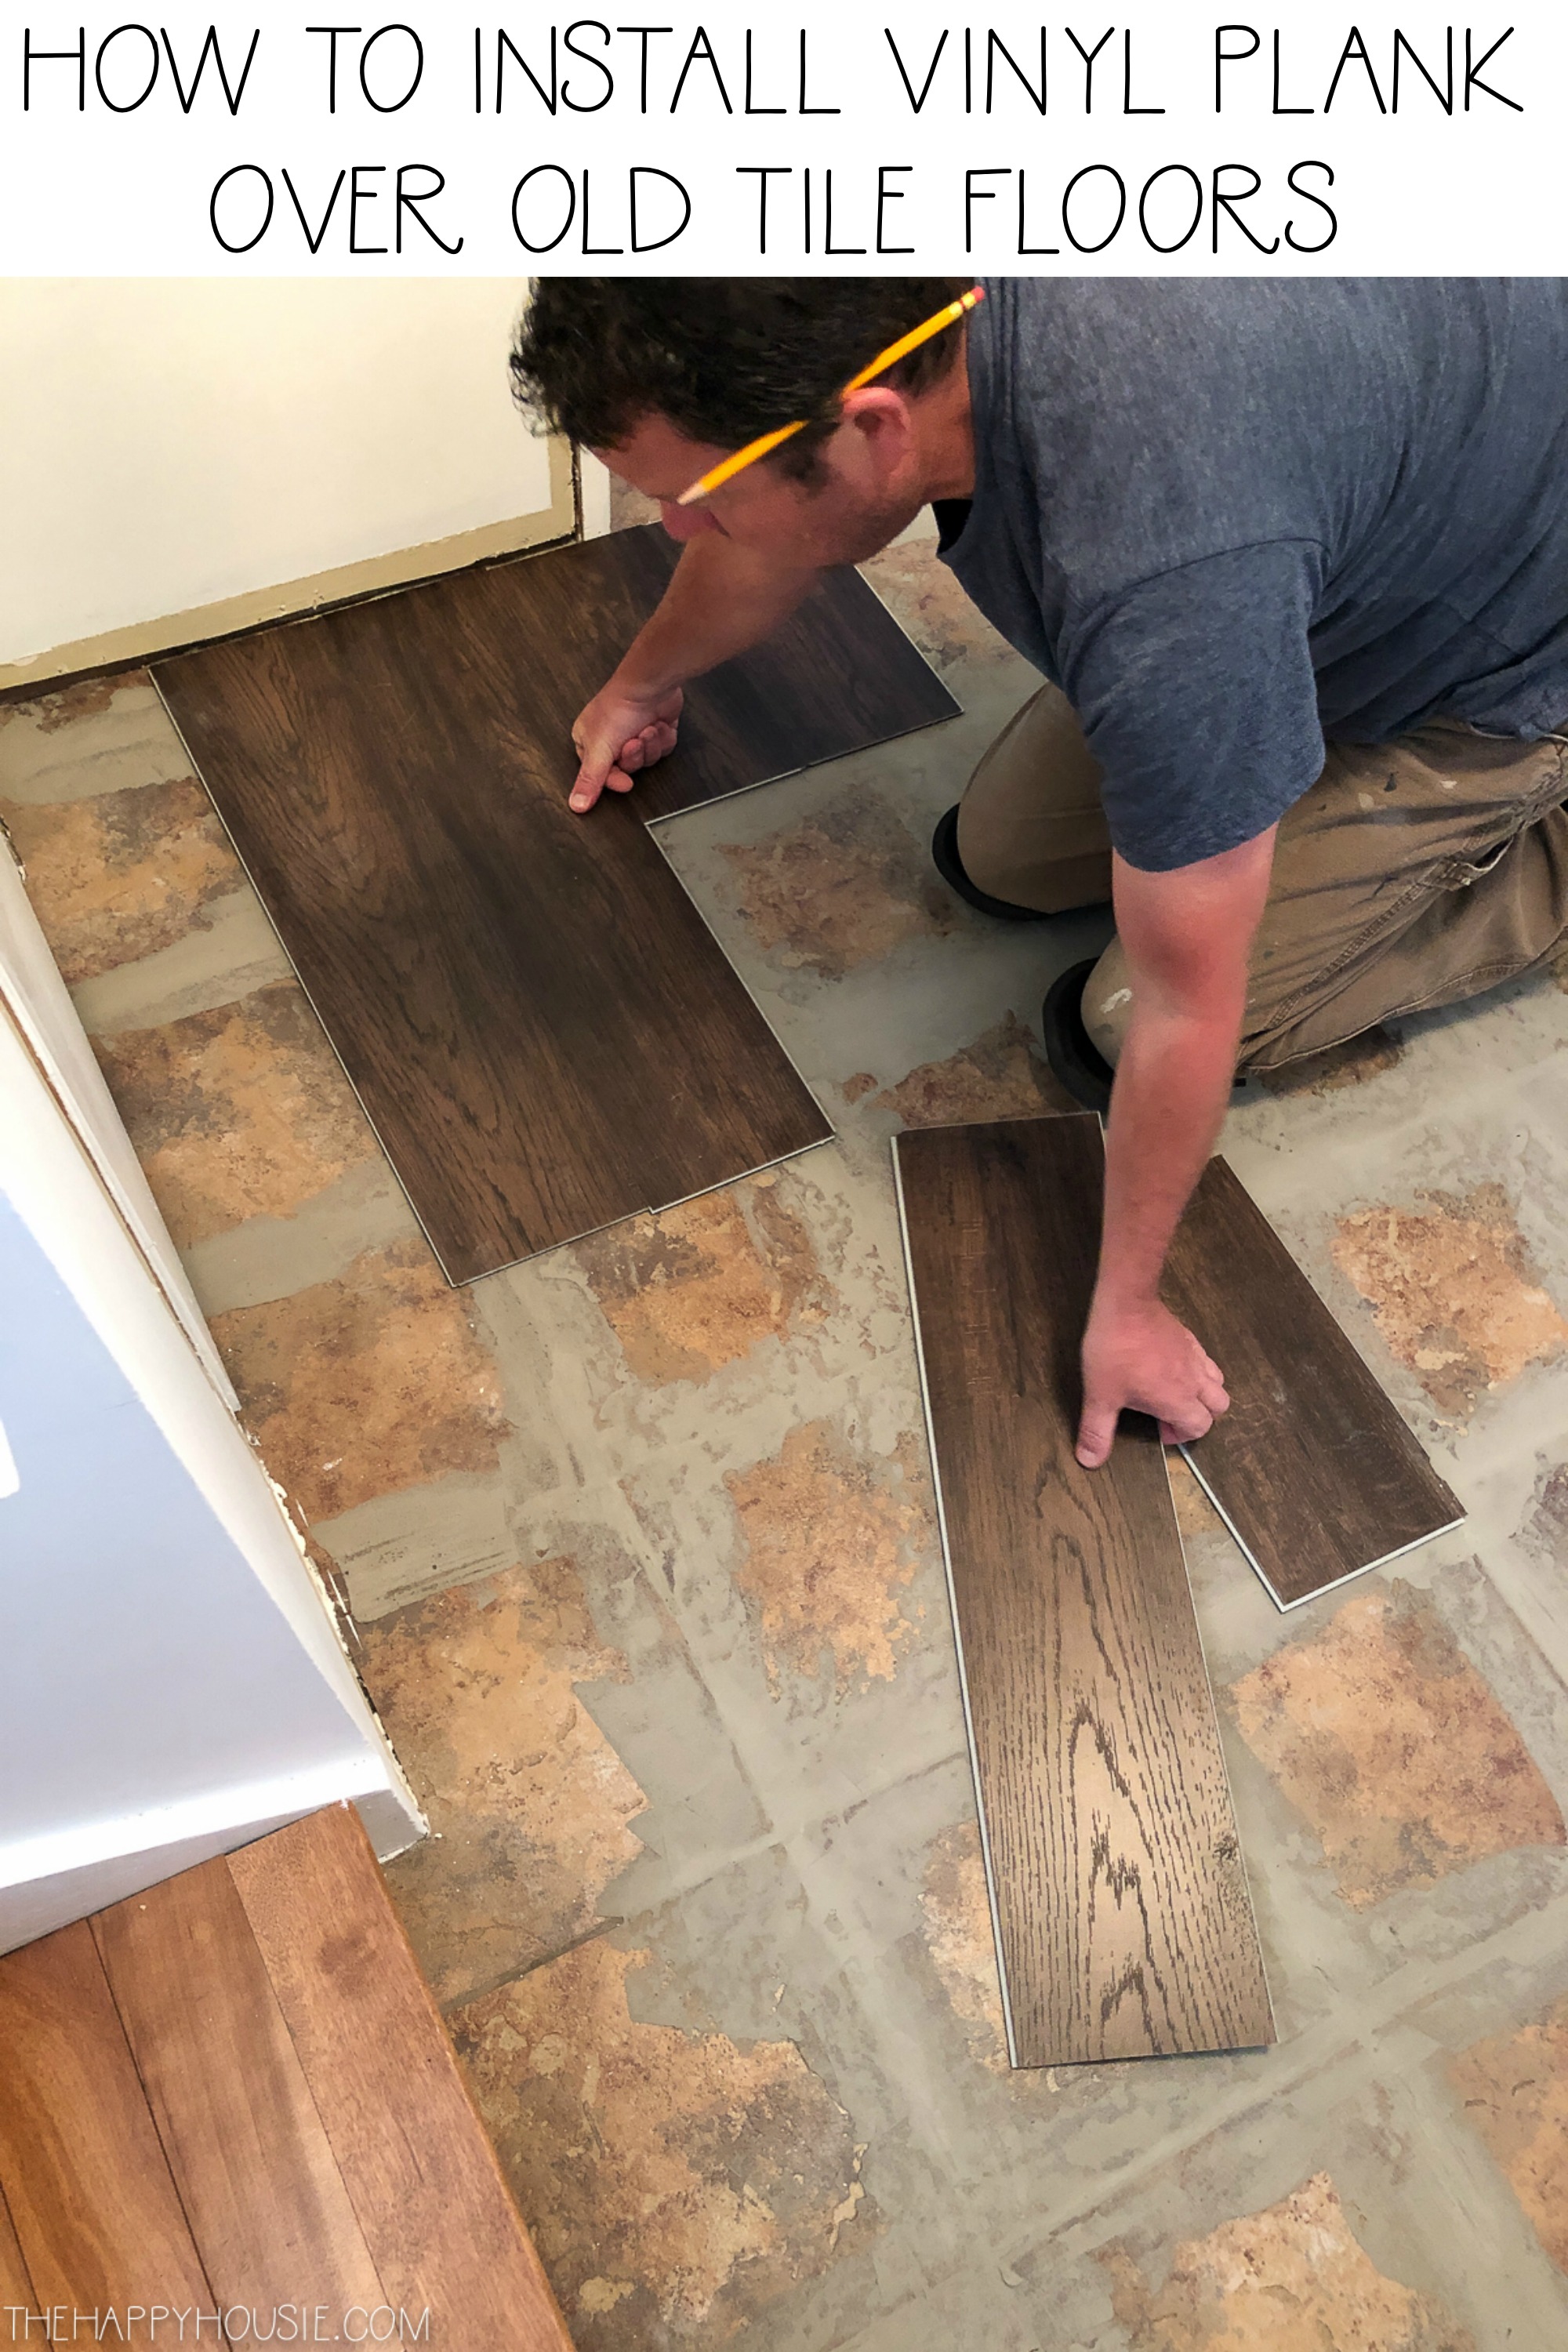 Install Vinyl Plank Over Tile Floors, Can You Put Vinyl Plank Flooring Over Asbestos Tile